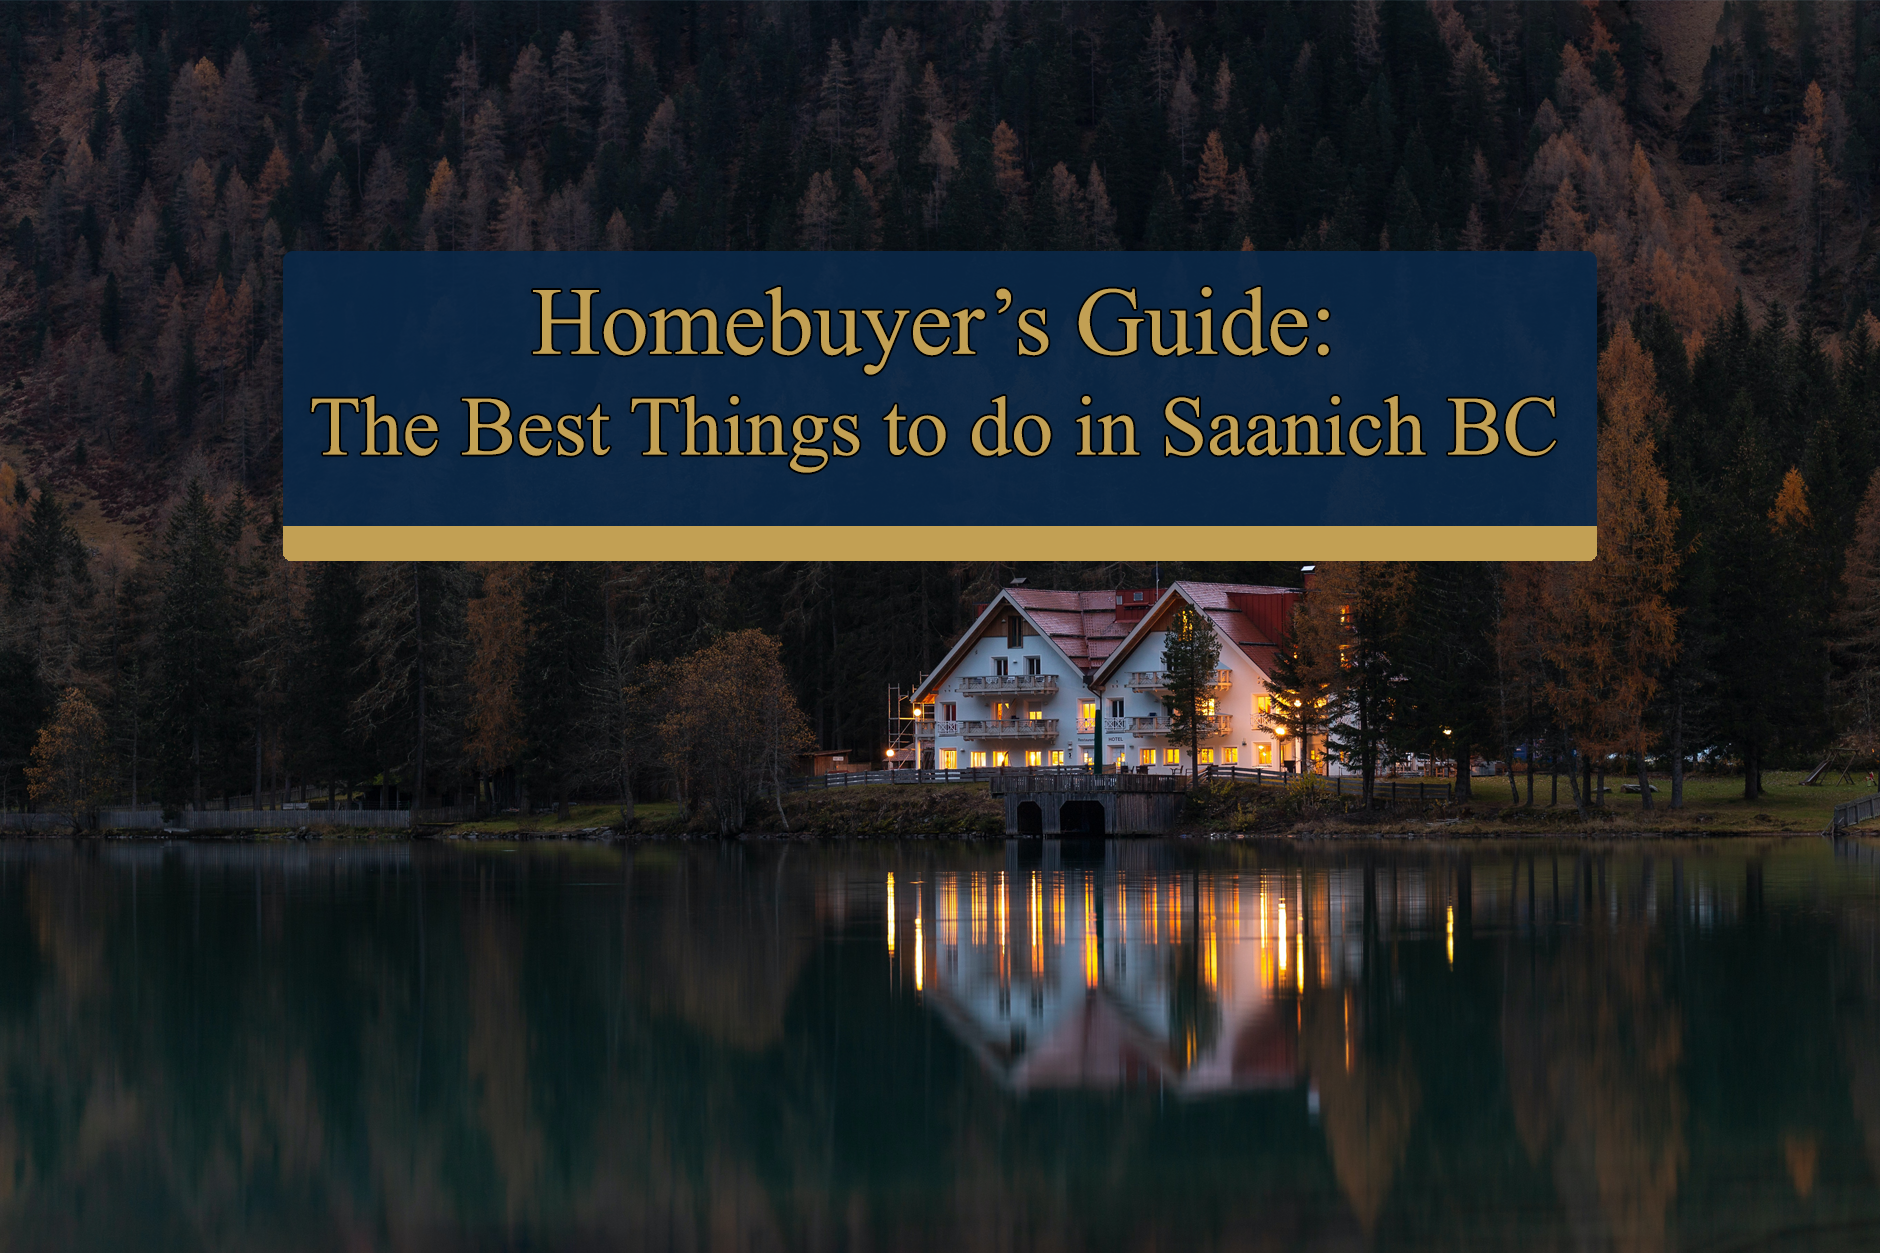 Homebuyer's Guide: The Best Things to do in Saanich BC